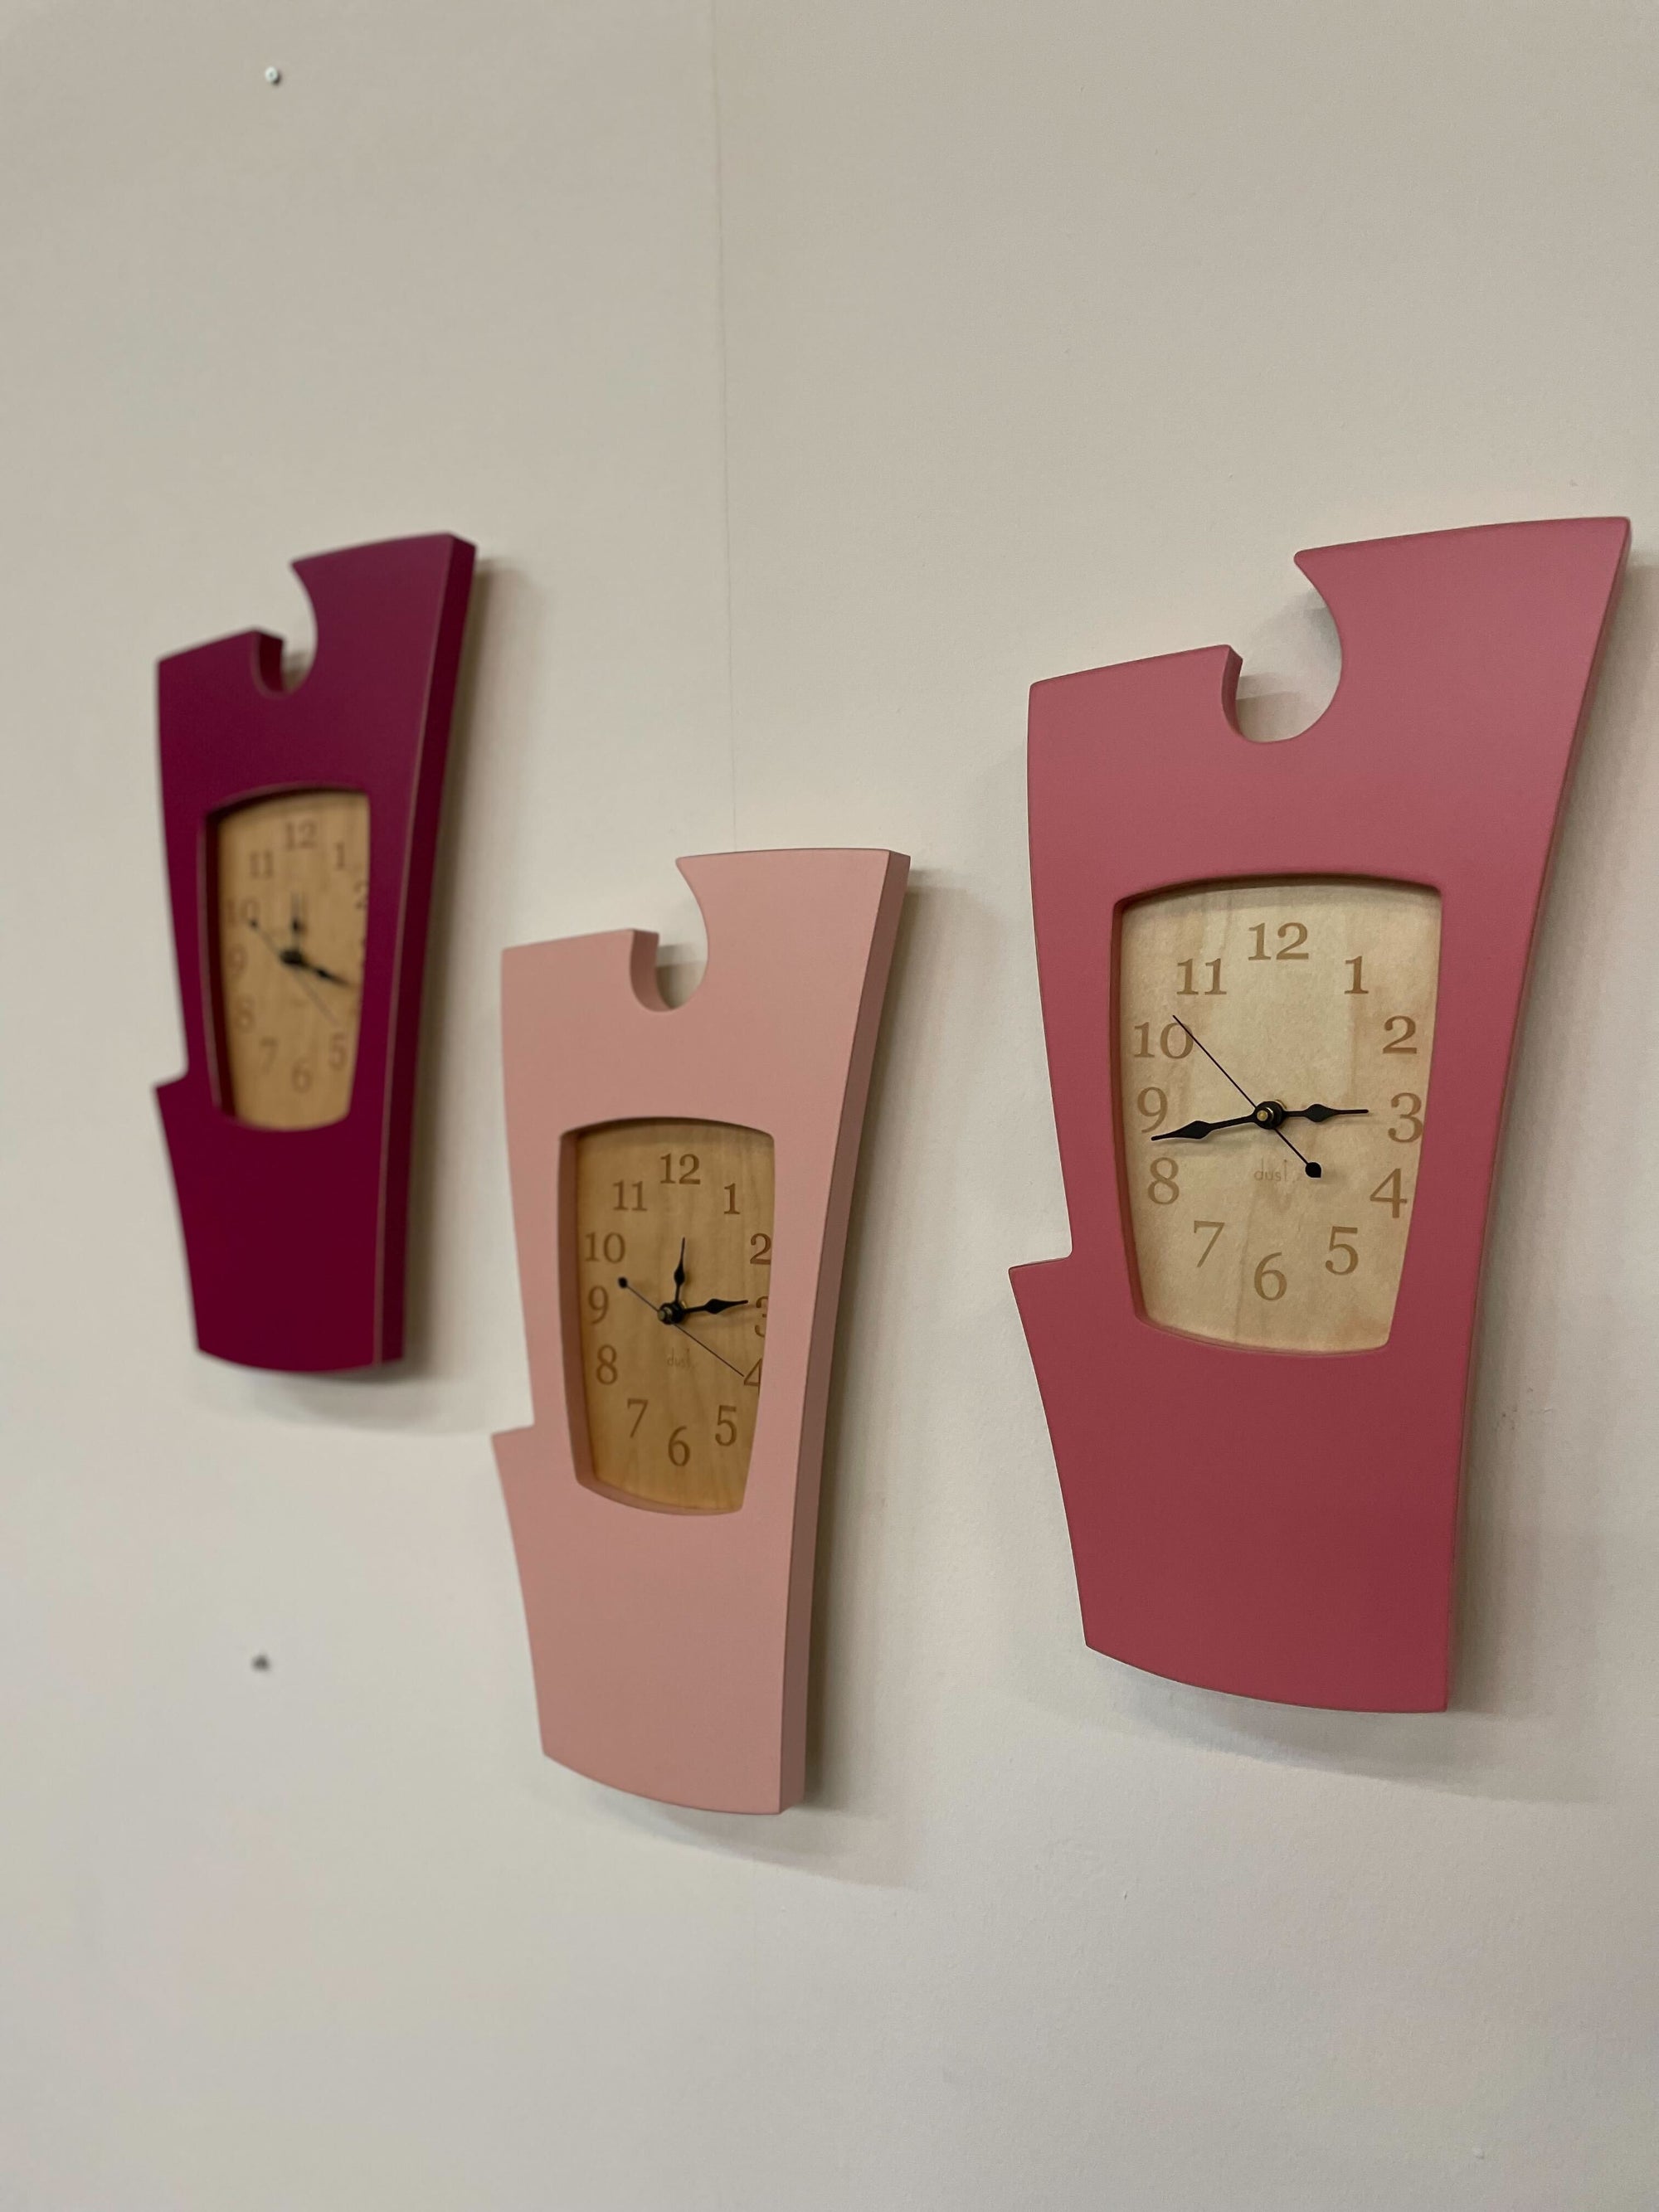 *SALE* - Simon Says Clock - Shades of Pink